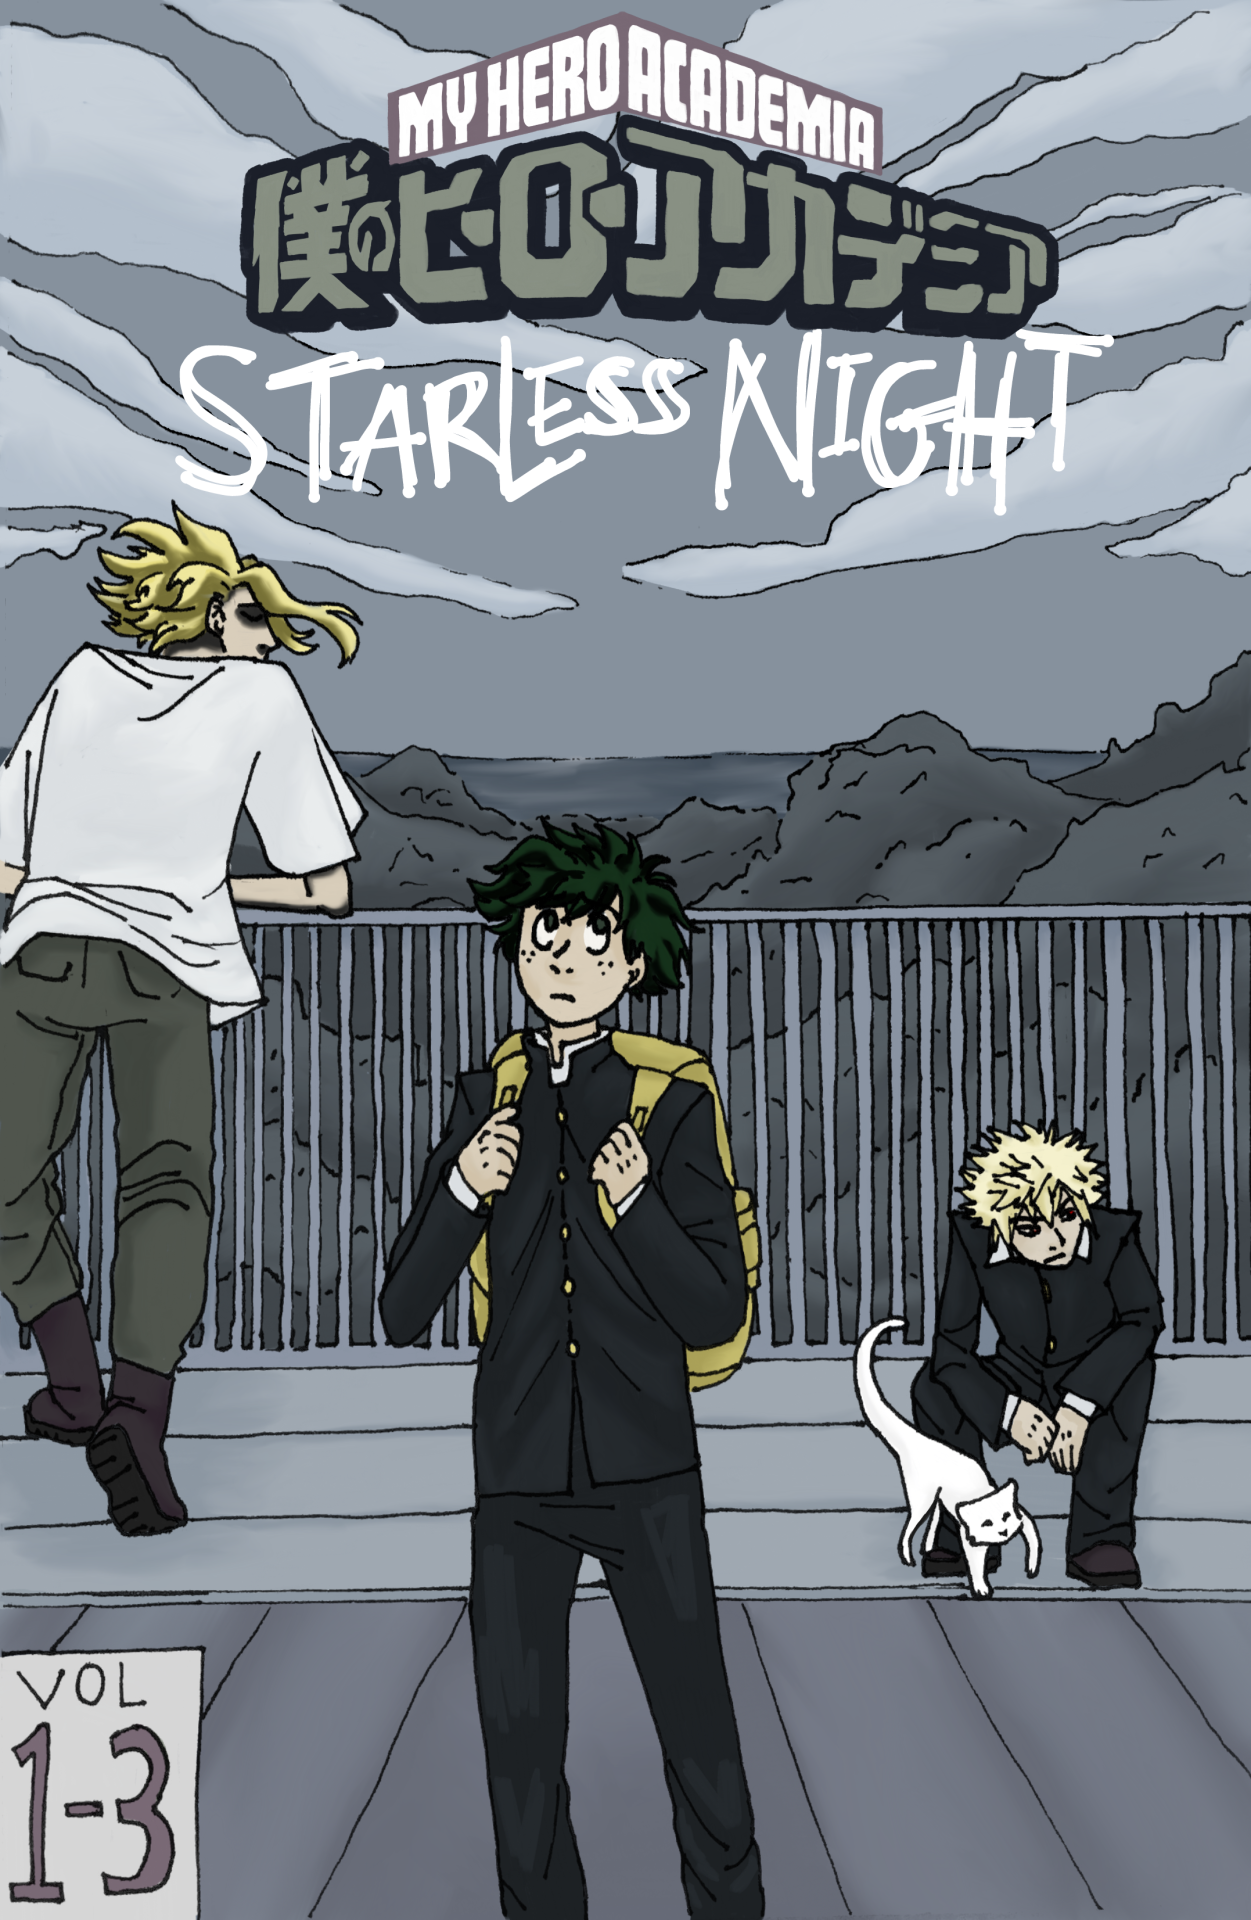 midoriya stands in the foreground holding the straps of his backpack. In the background on the left, all might is facing away, leaning over the railing and looking out at the trash covered beach. Bakugou is crouched in the right background and a white cat is near him. In the bottom left is a little box that says “vol. 1-3.” At the top is the regular bnha logo but the colors are super desaturated. In white scrachy font near it is the title “starless night.” The sky is grey and the trash and ocean are greyish and basically the whole world looks devoid of color, but it’s not actually a black and white picture.